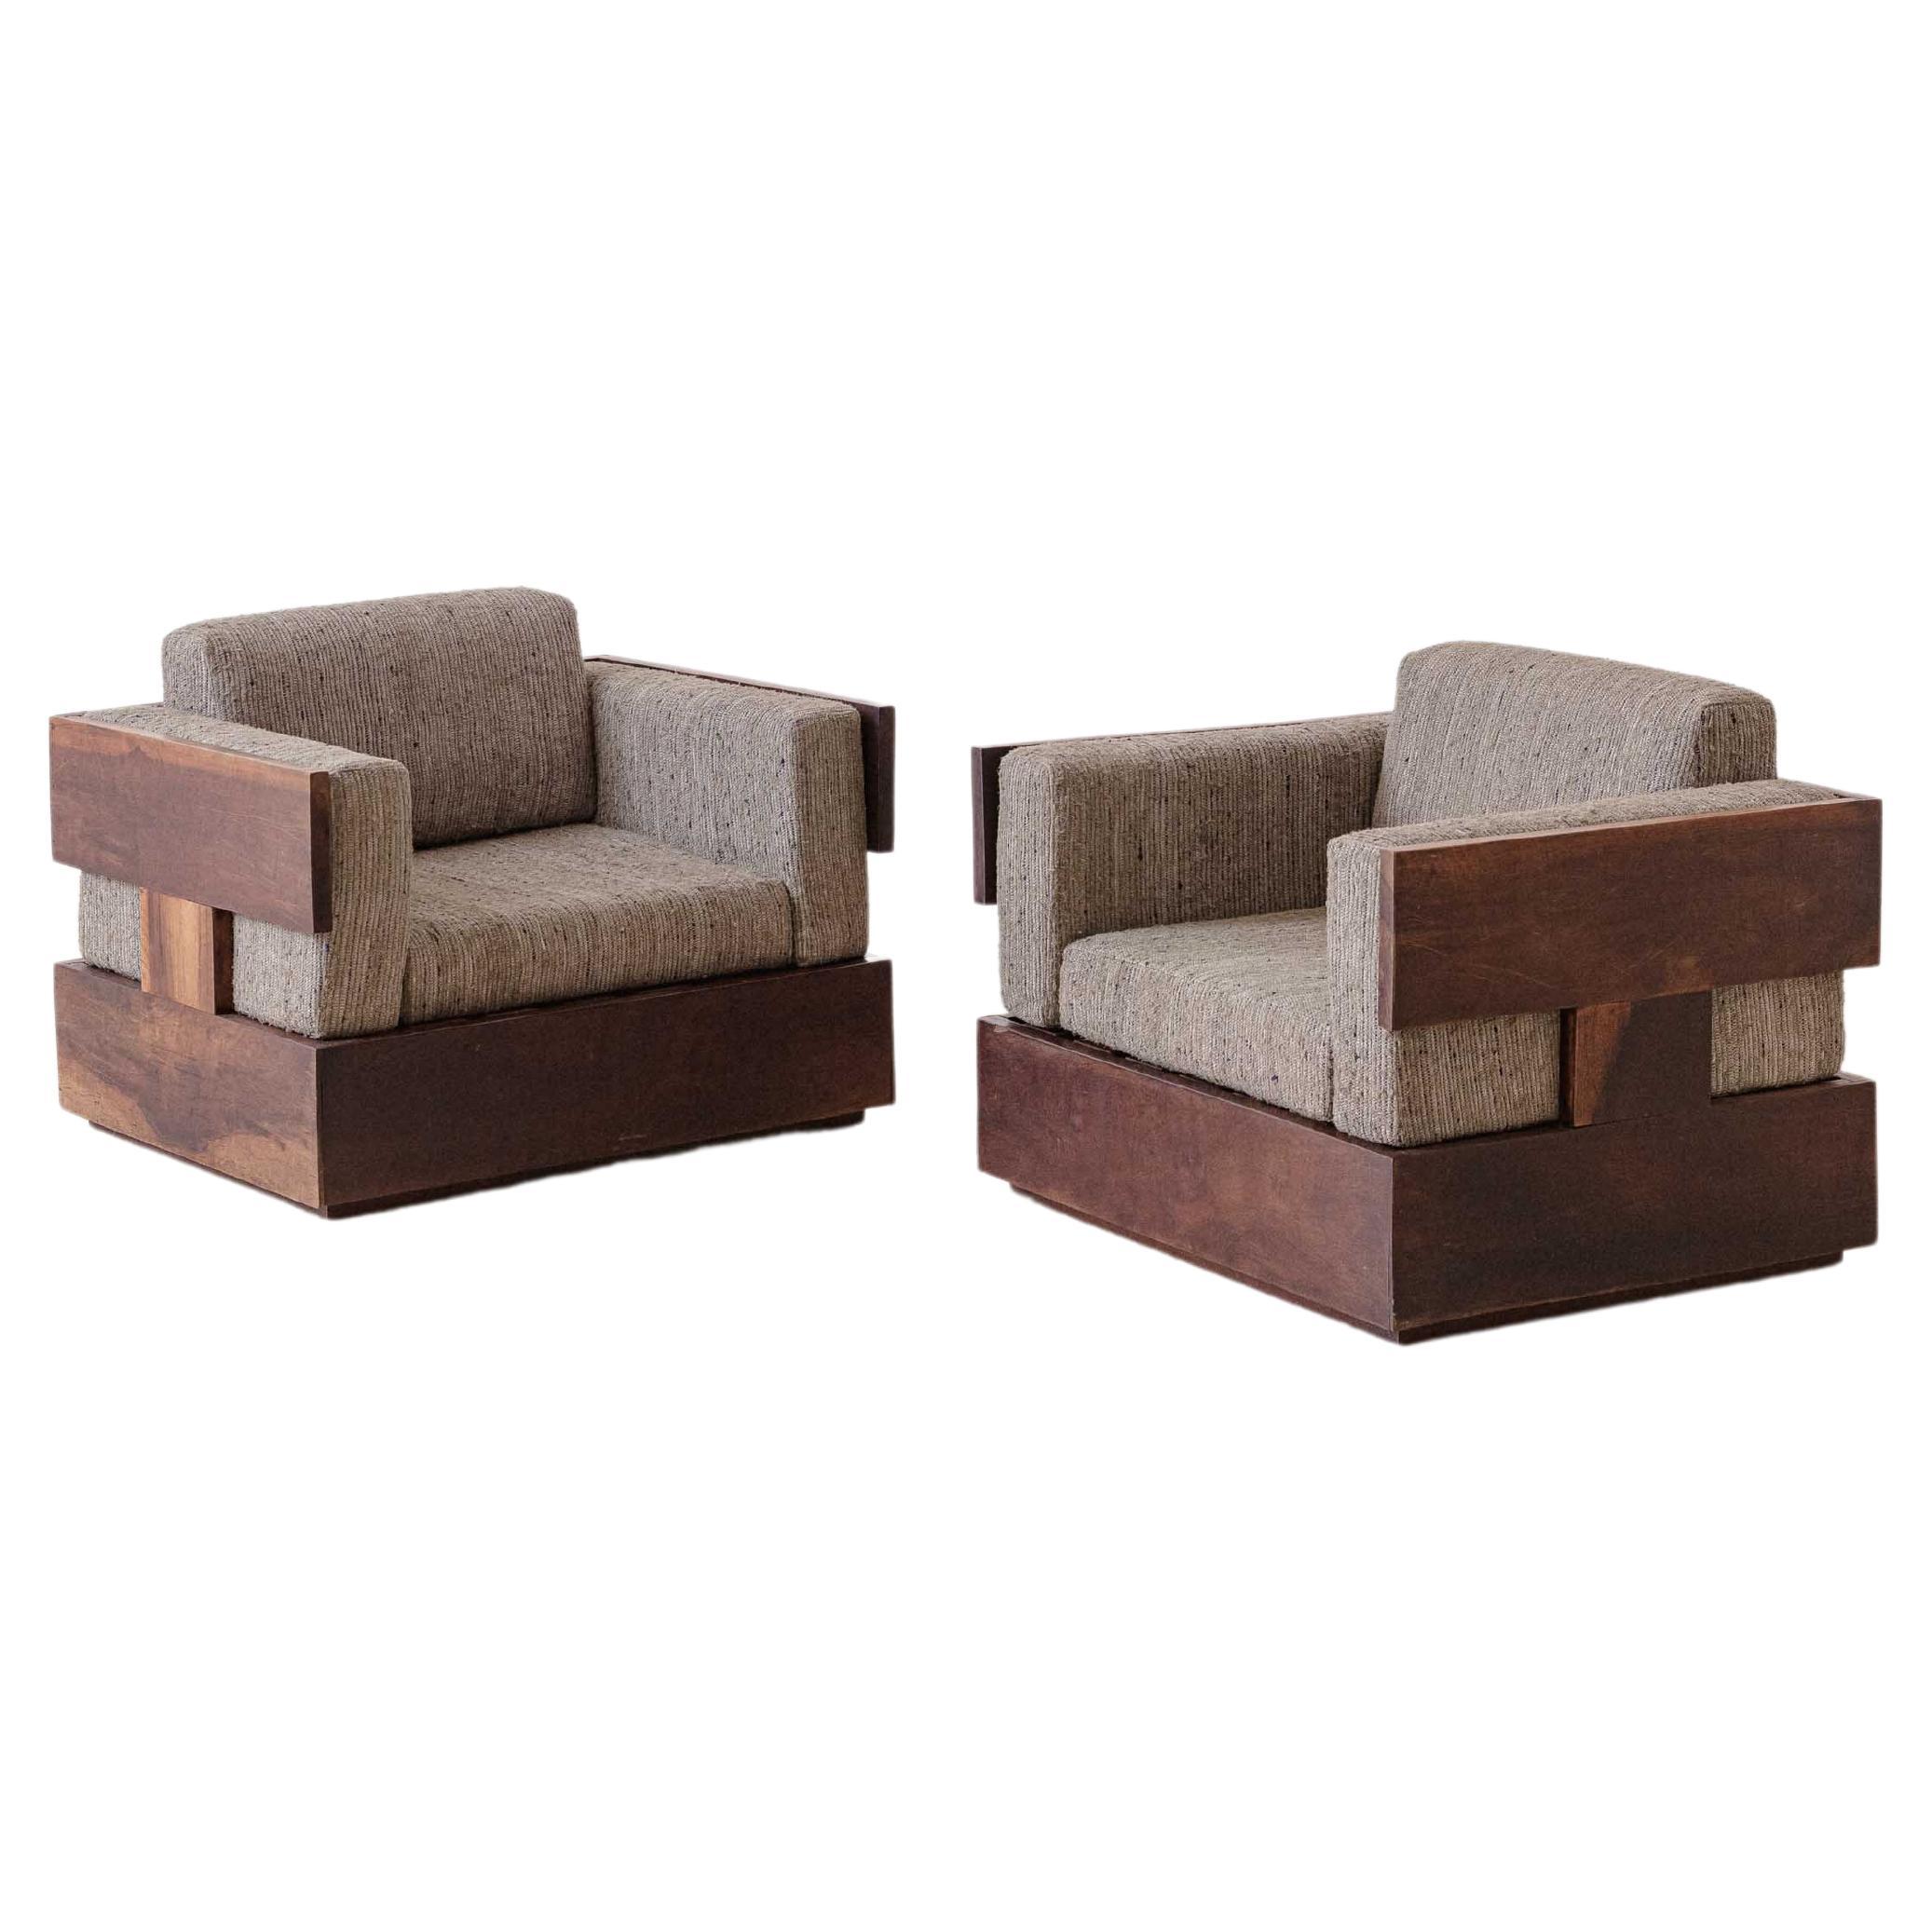 Pair of Rosewood Armchairs by Celina Decorações, Brazilian Midcentury, 1960s For Sale